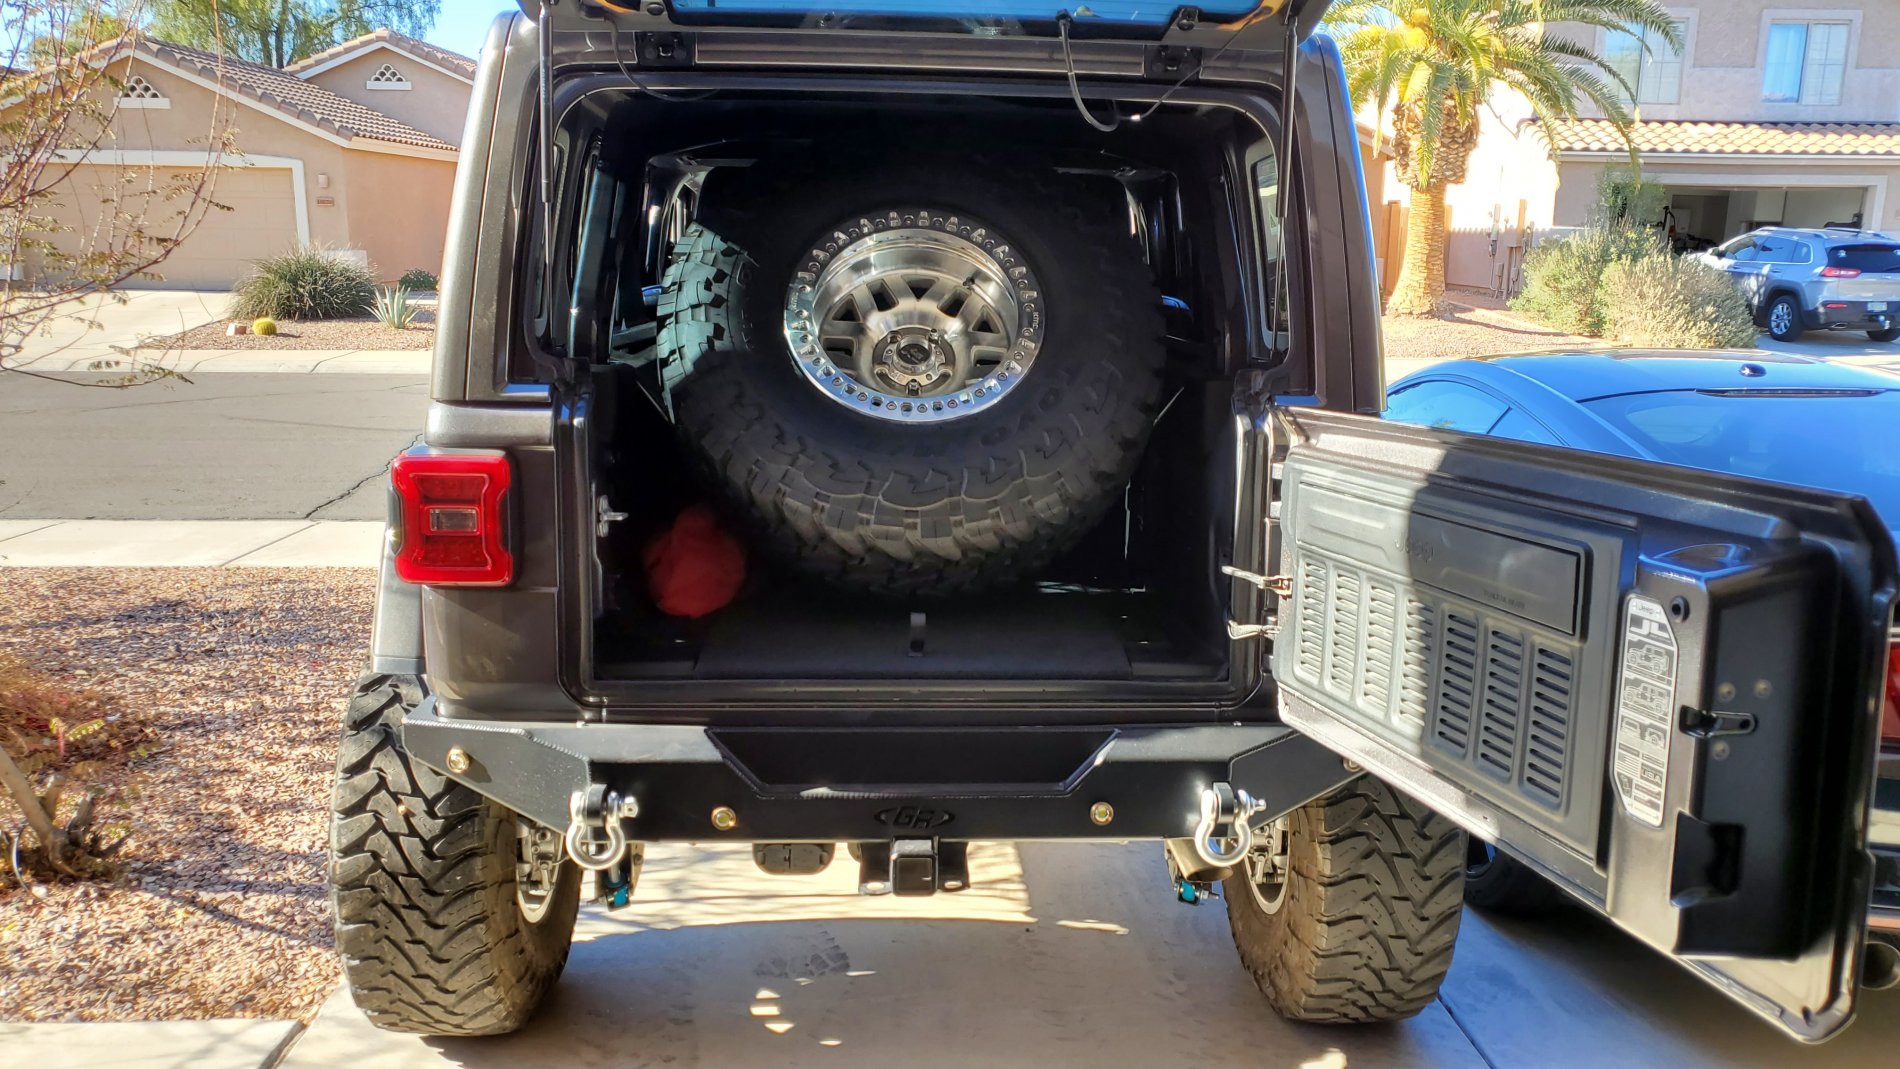 Jeep Wrangler JL Can you fit 5 37x12.5r17 Ko2 tires in the back of a jeep? 20210222_155458